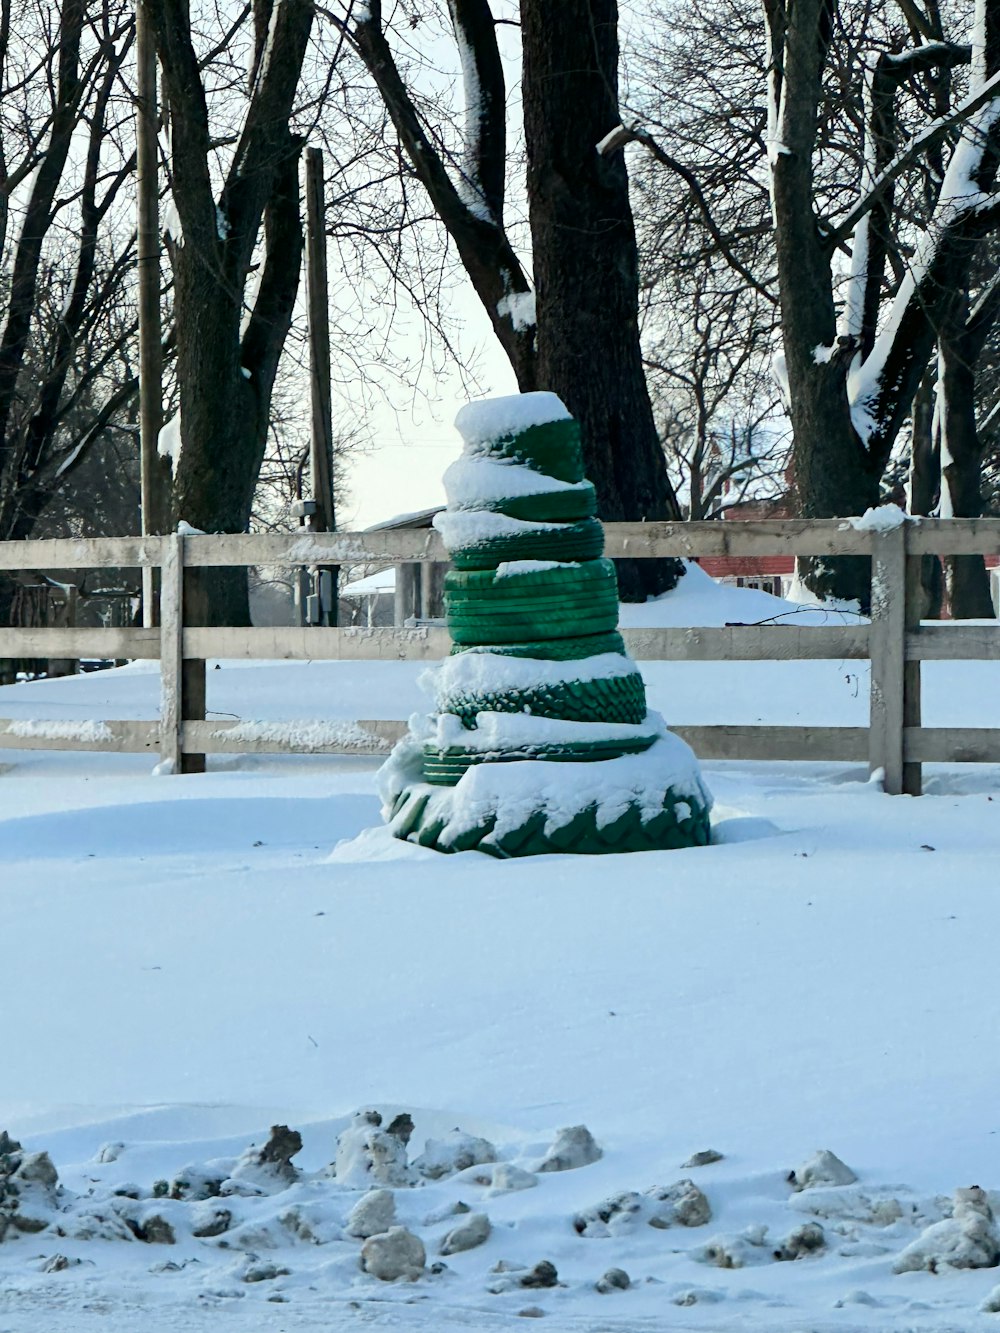 a green fire hydrant covered in snow next to trees